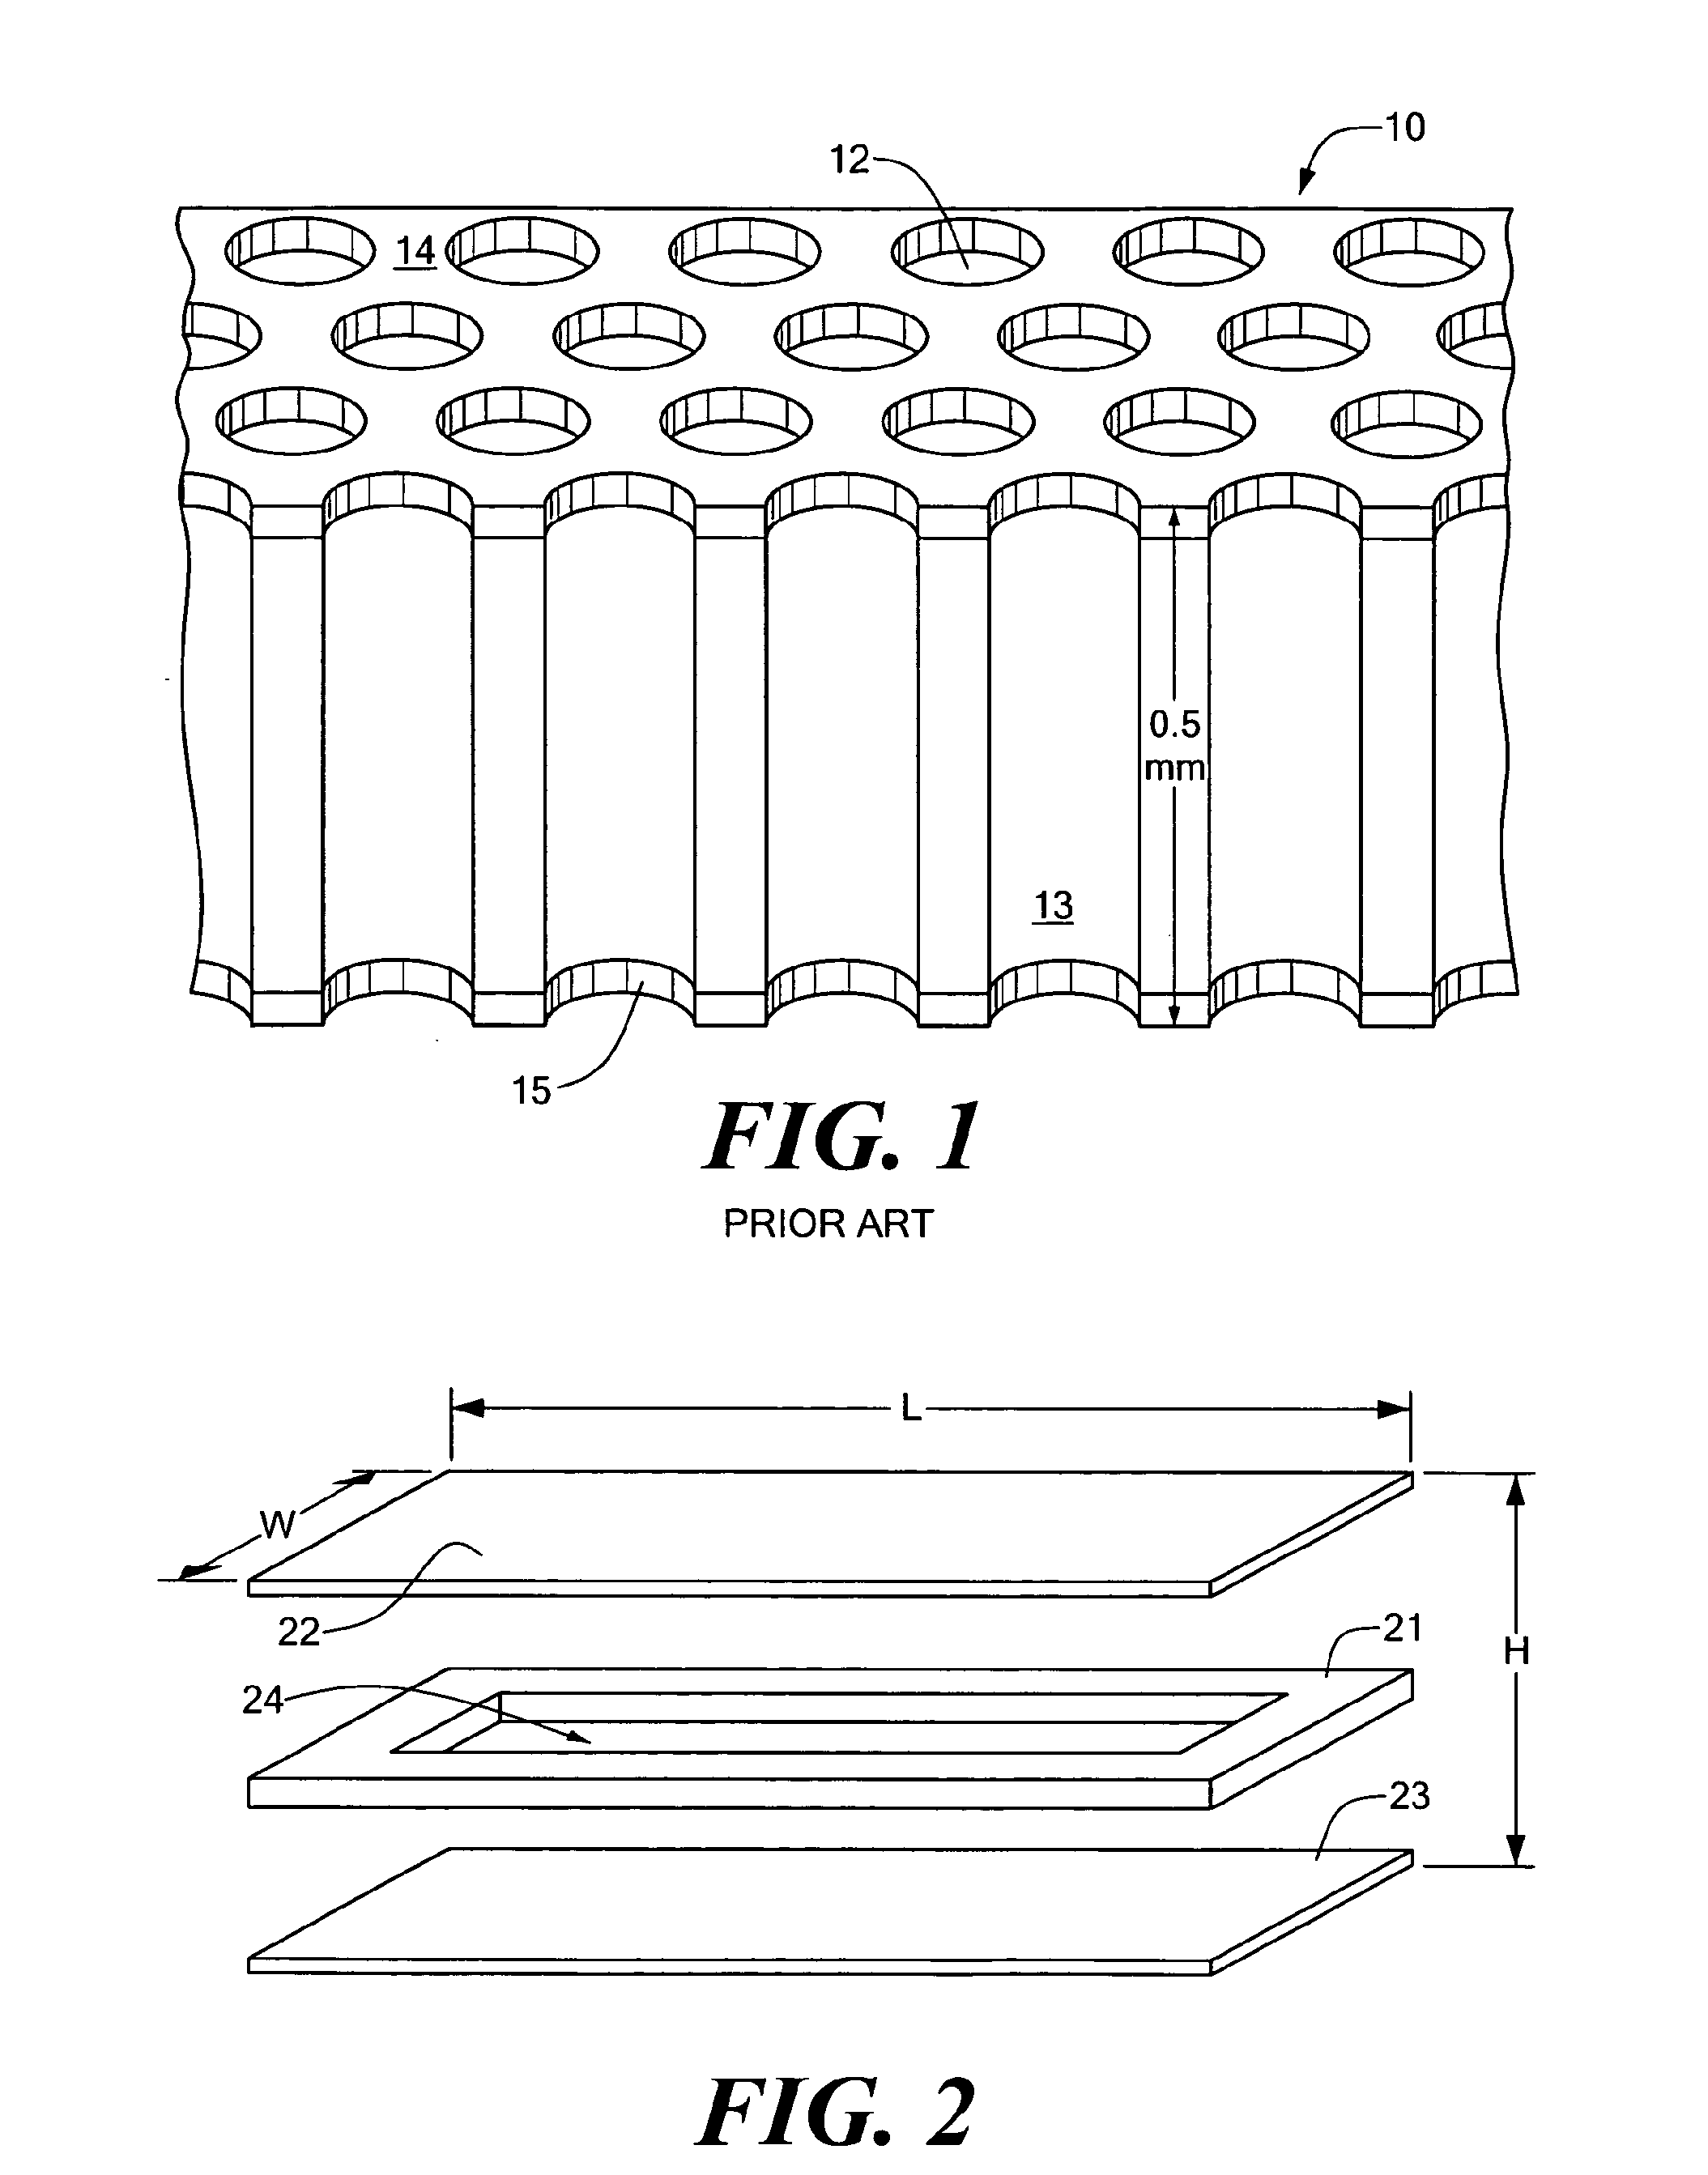 Assay imaging apparatus and methods